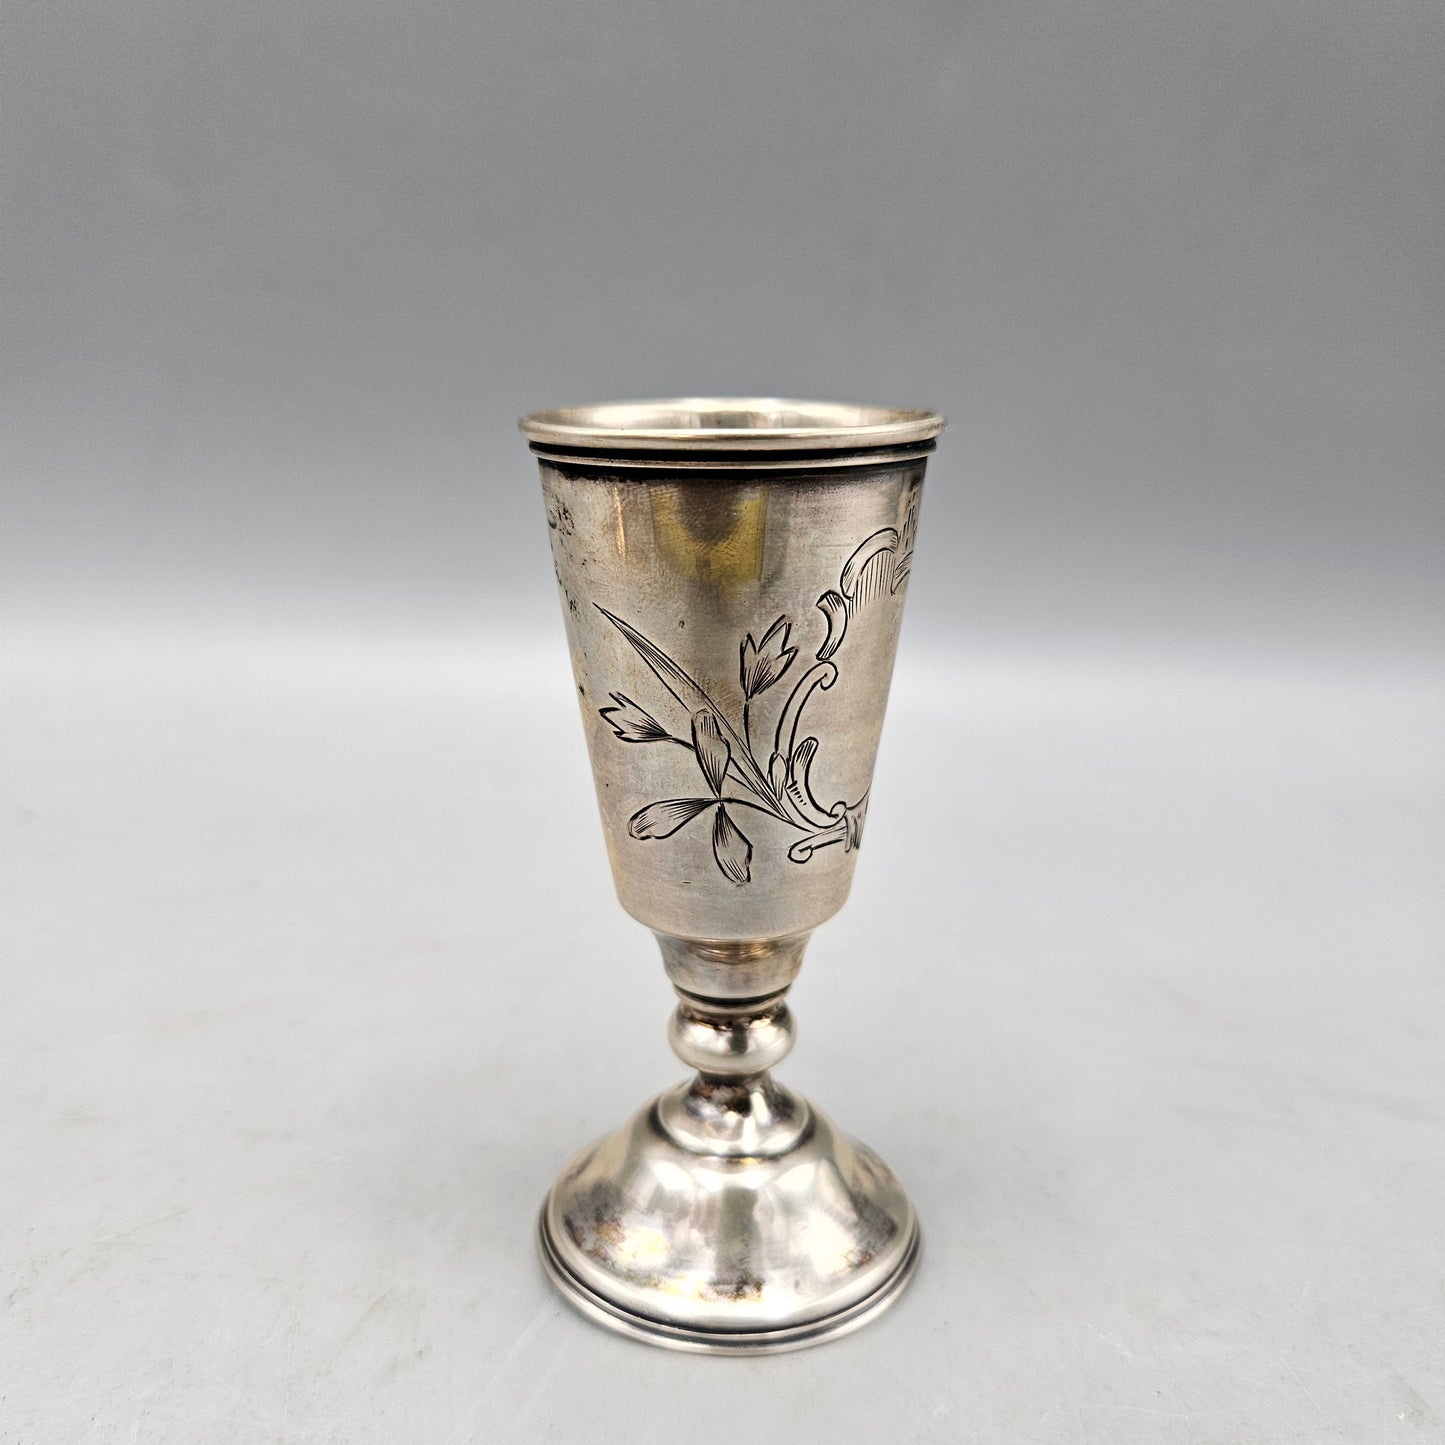 Antique Russian Vodka Cup with Floral Design